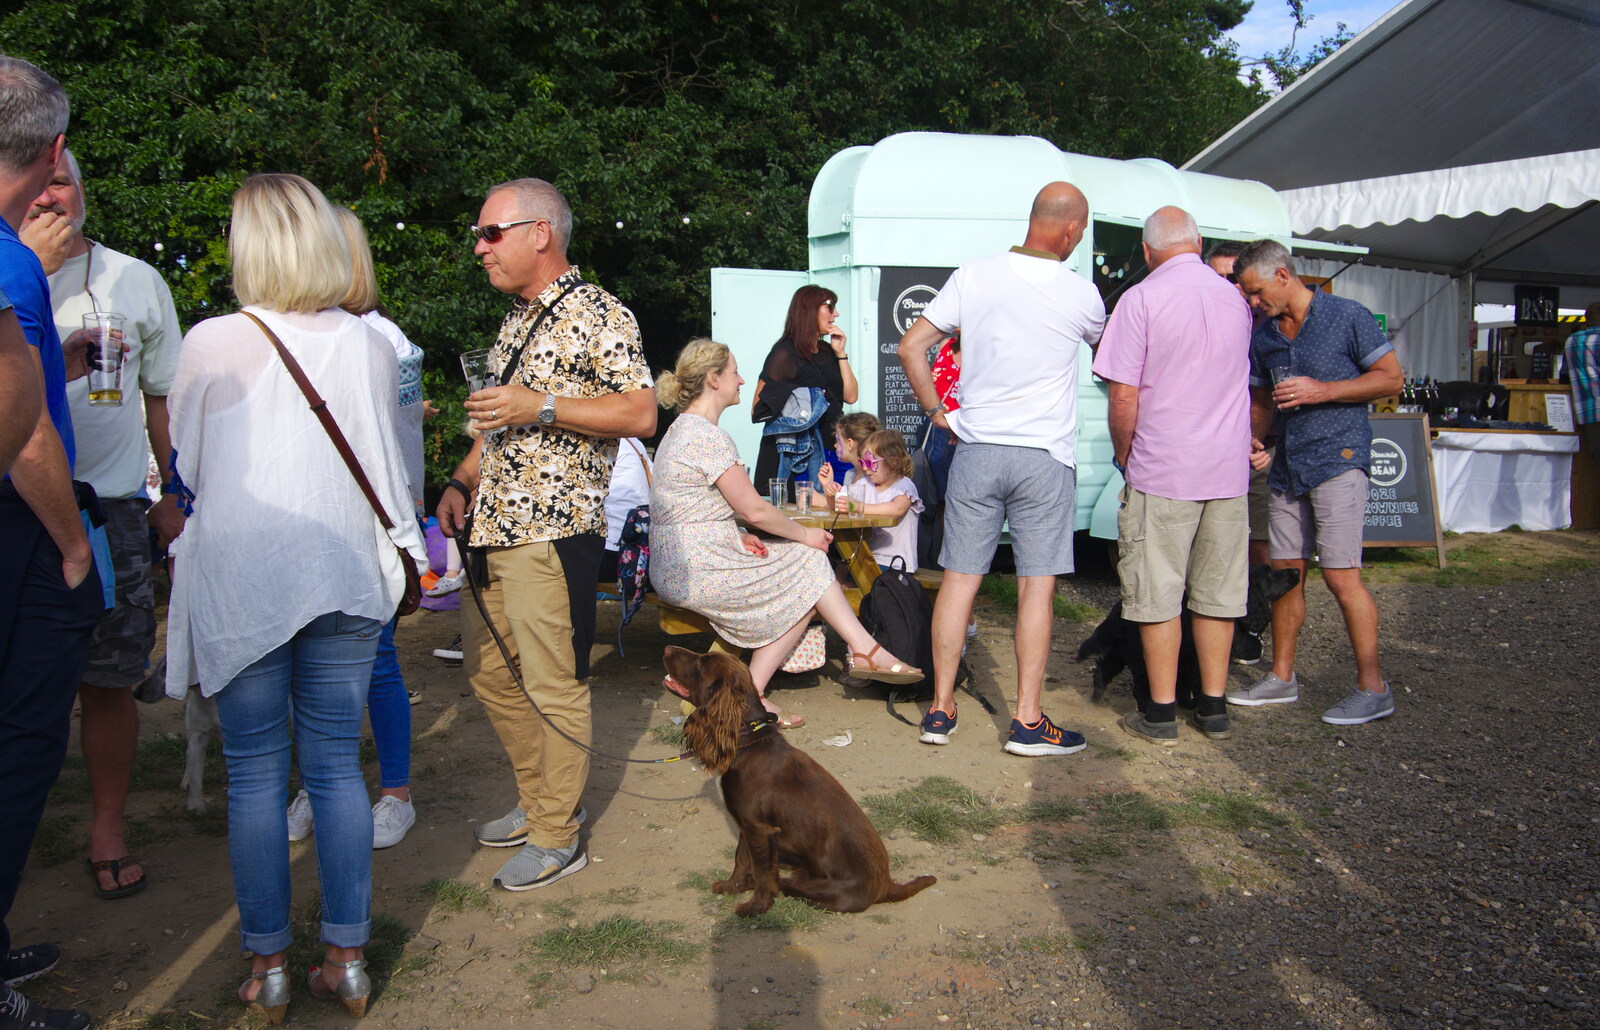 A dog looks up eagerly from The Shakesbeer Festival, Star Wing Brewery, Redgrave, Suffolk - 13th July 2019